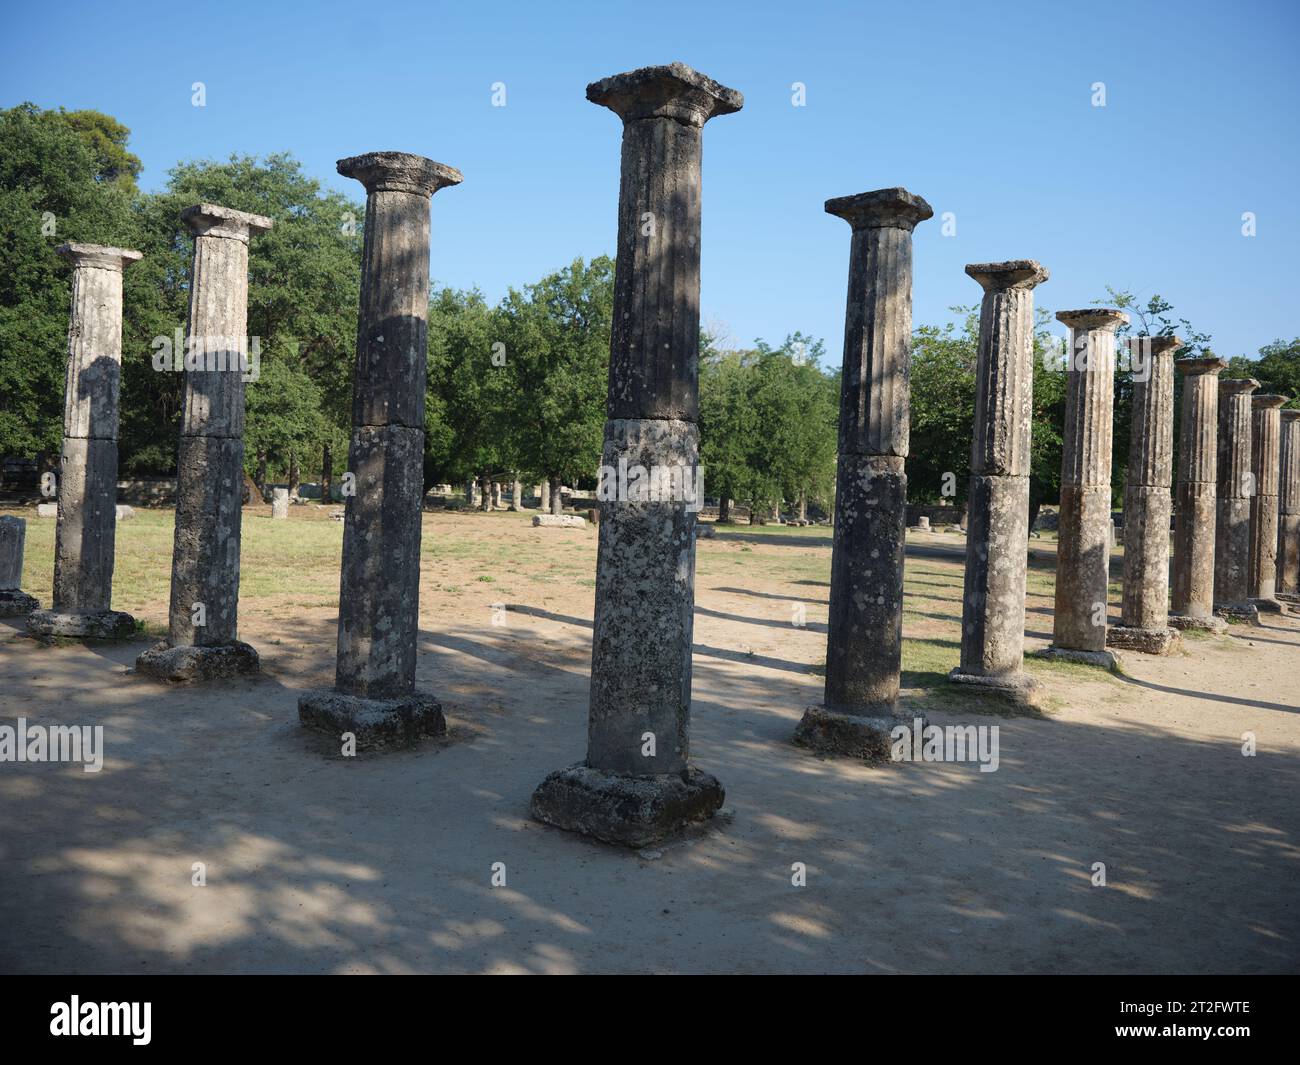 Ancient gymnasium of Olympia. The gymnasium was a place where athletes trained for the Olympic Stock Photo